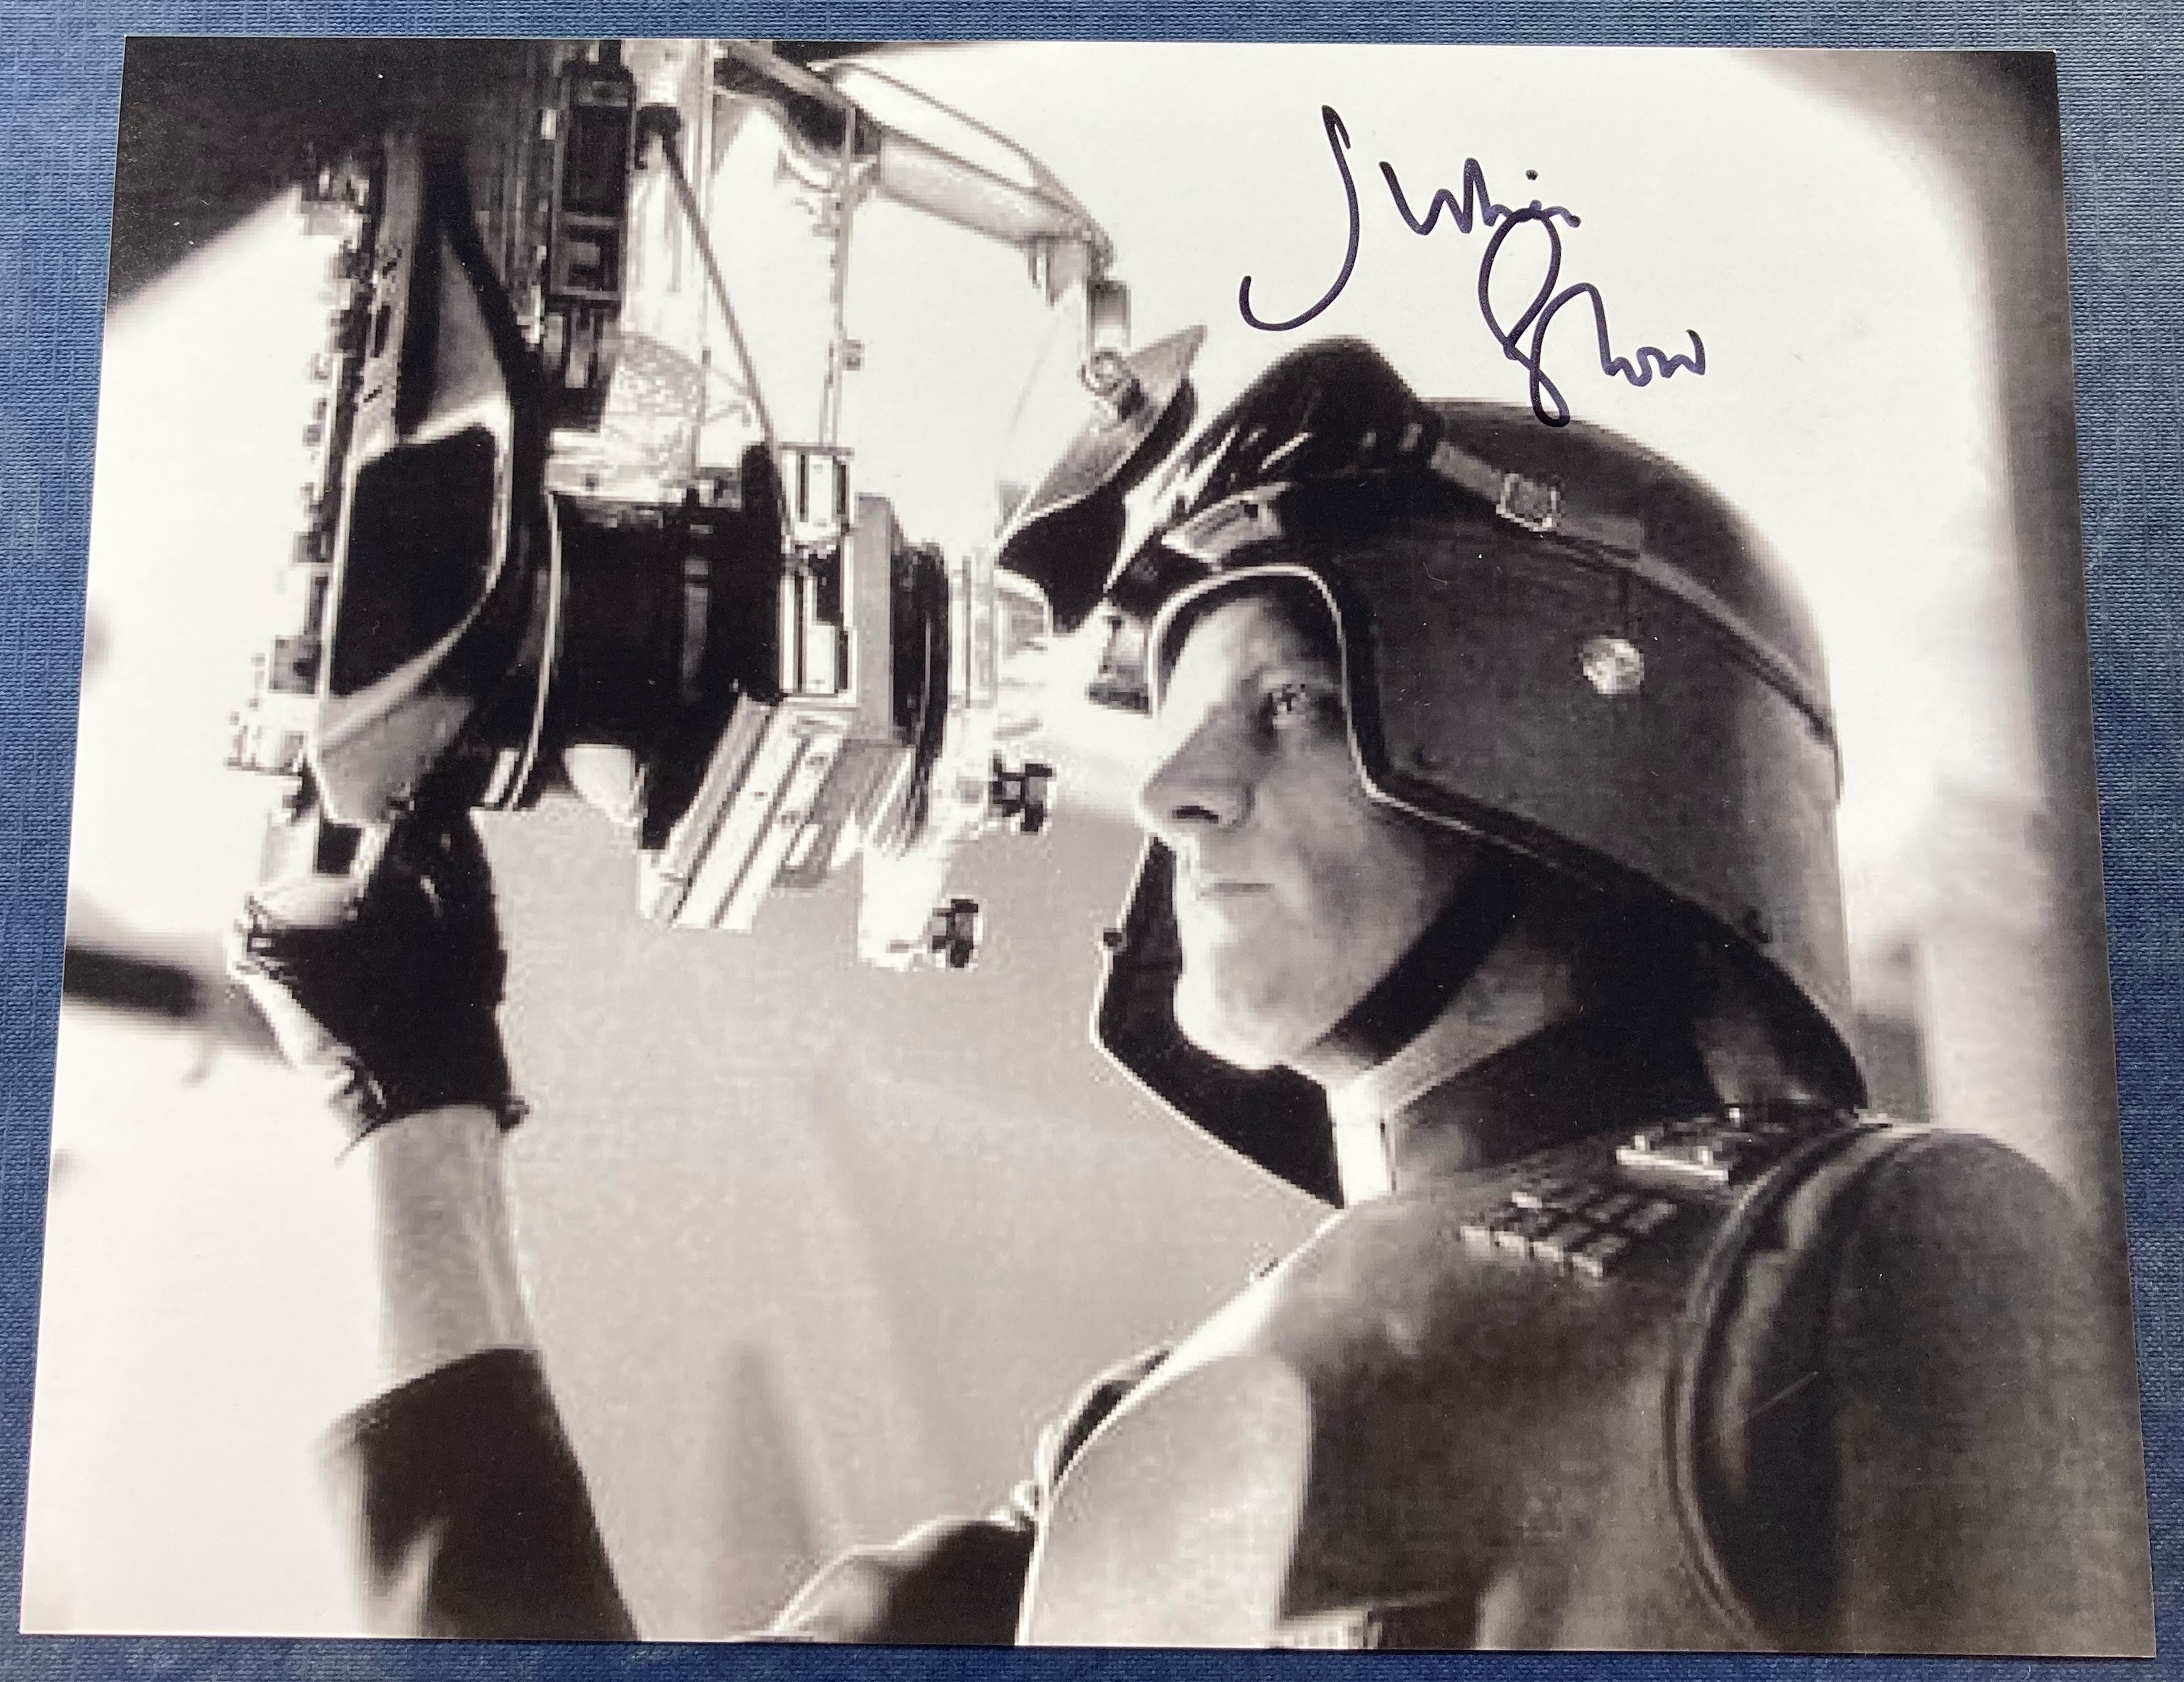 Star Wars Julian Glover as General Veers signed 10 x 8 inch b/w photo. Glover's well-known film